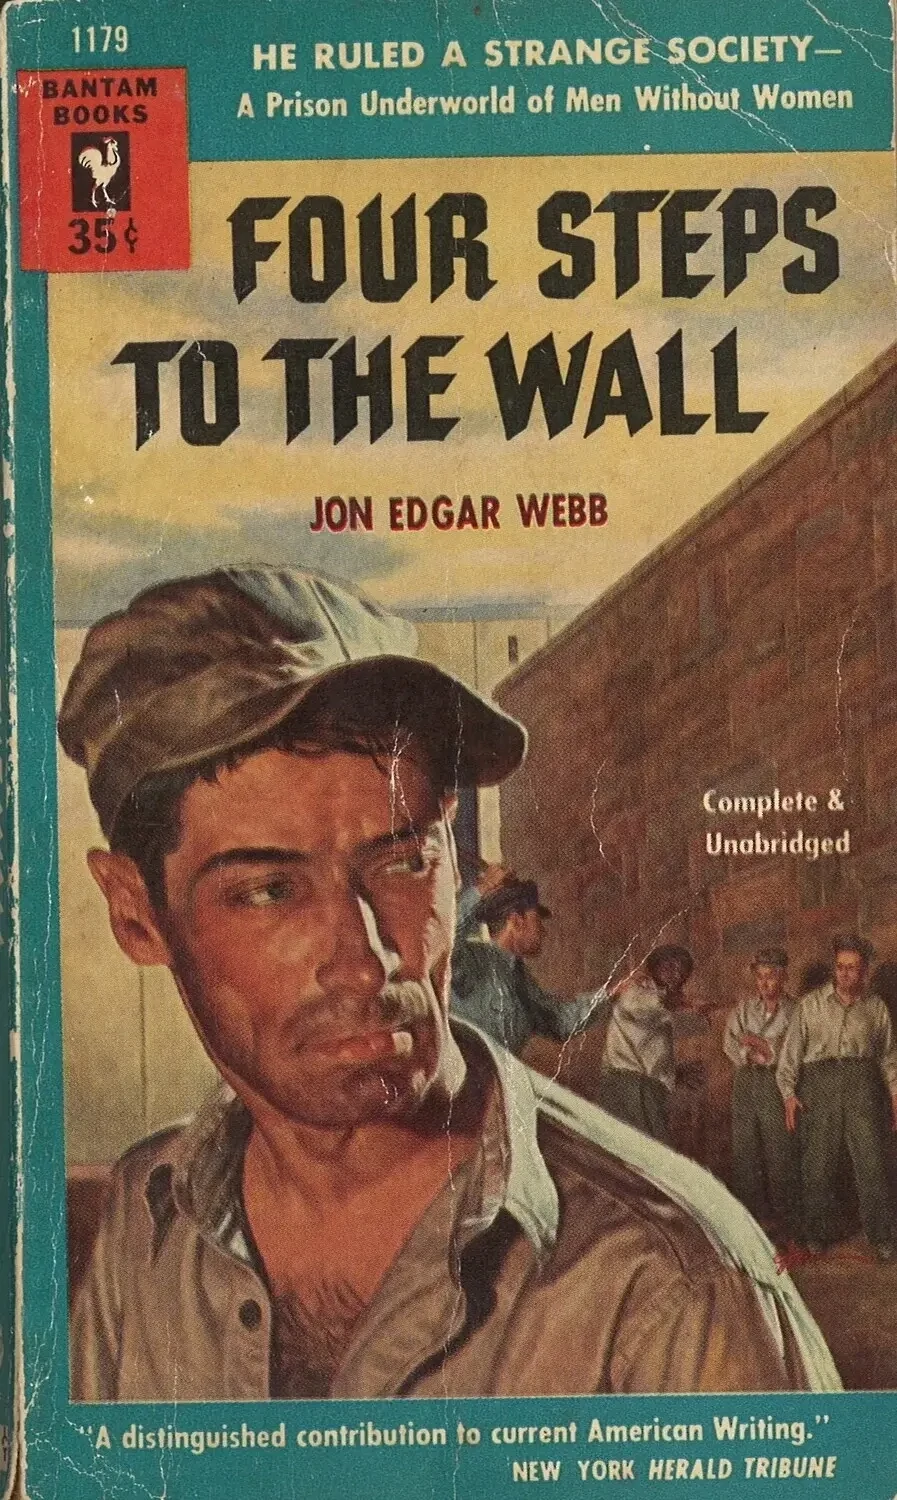 Four Steps To The Wall by Jon Edgar Webb